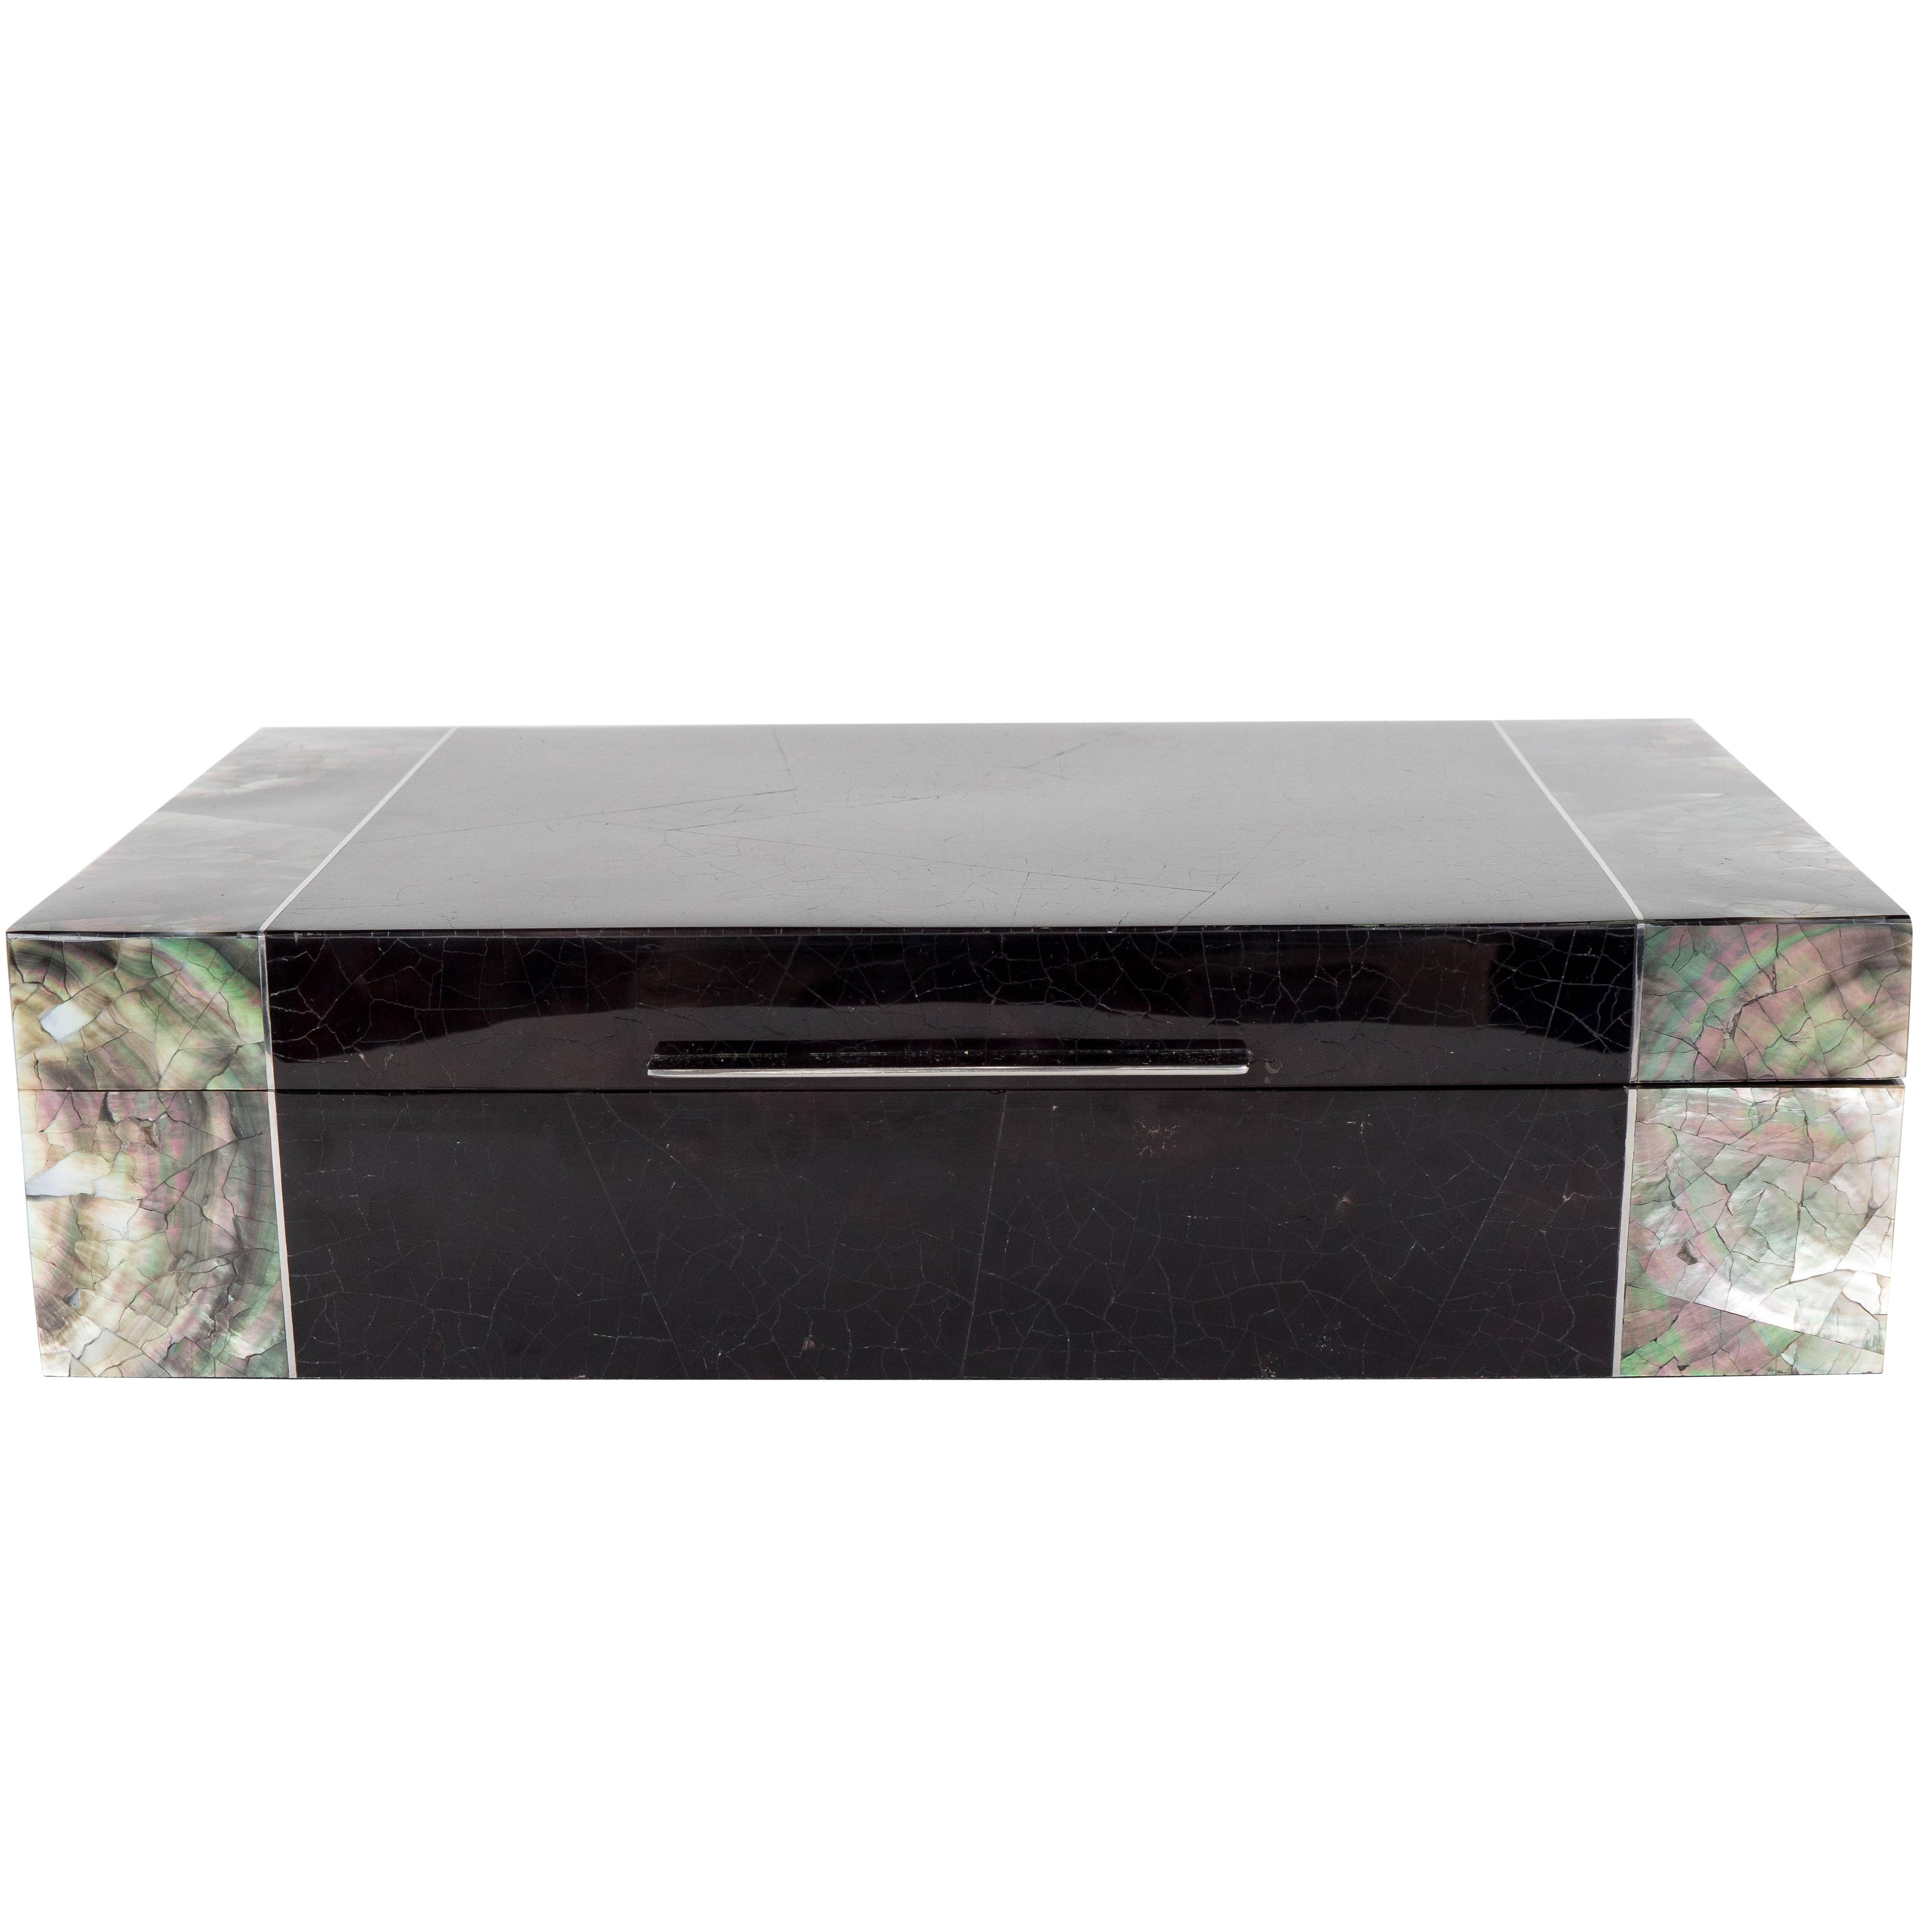 Exquisite Blacktab Shell Box with Tahiti Shell Ends and Silvered Inlay Trim